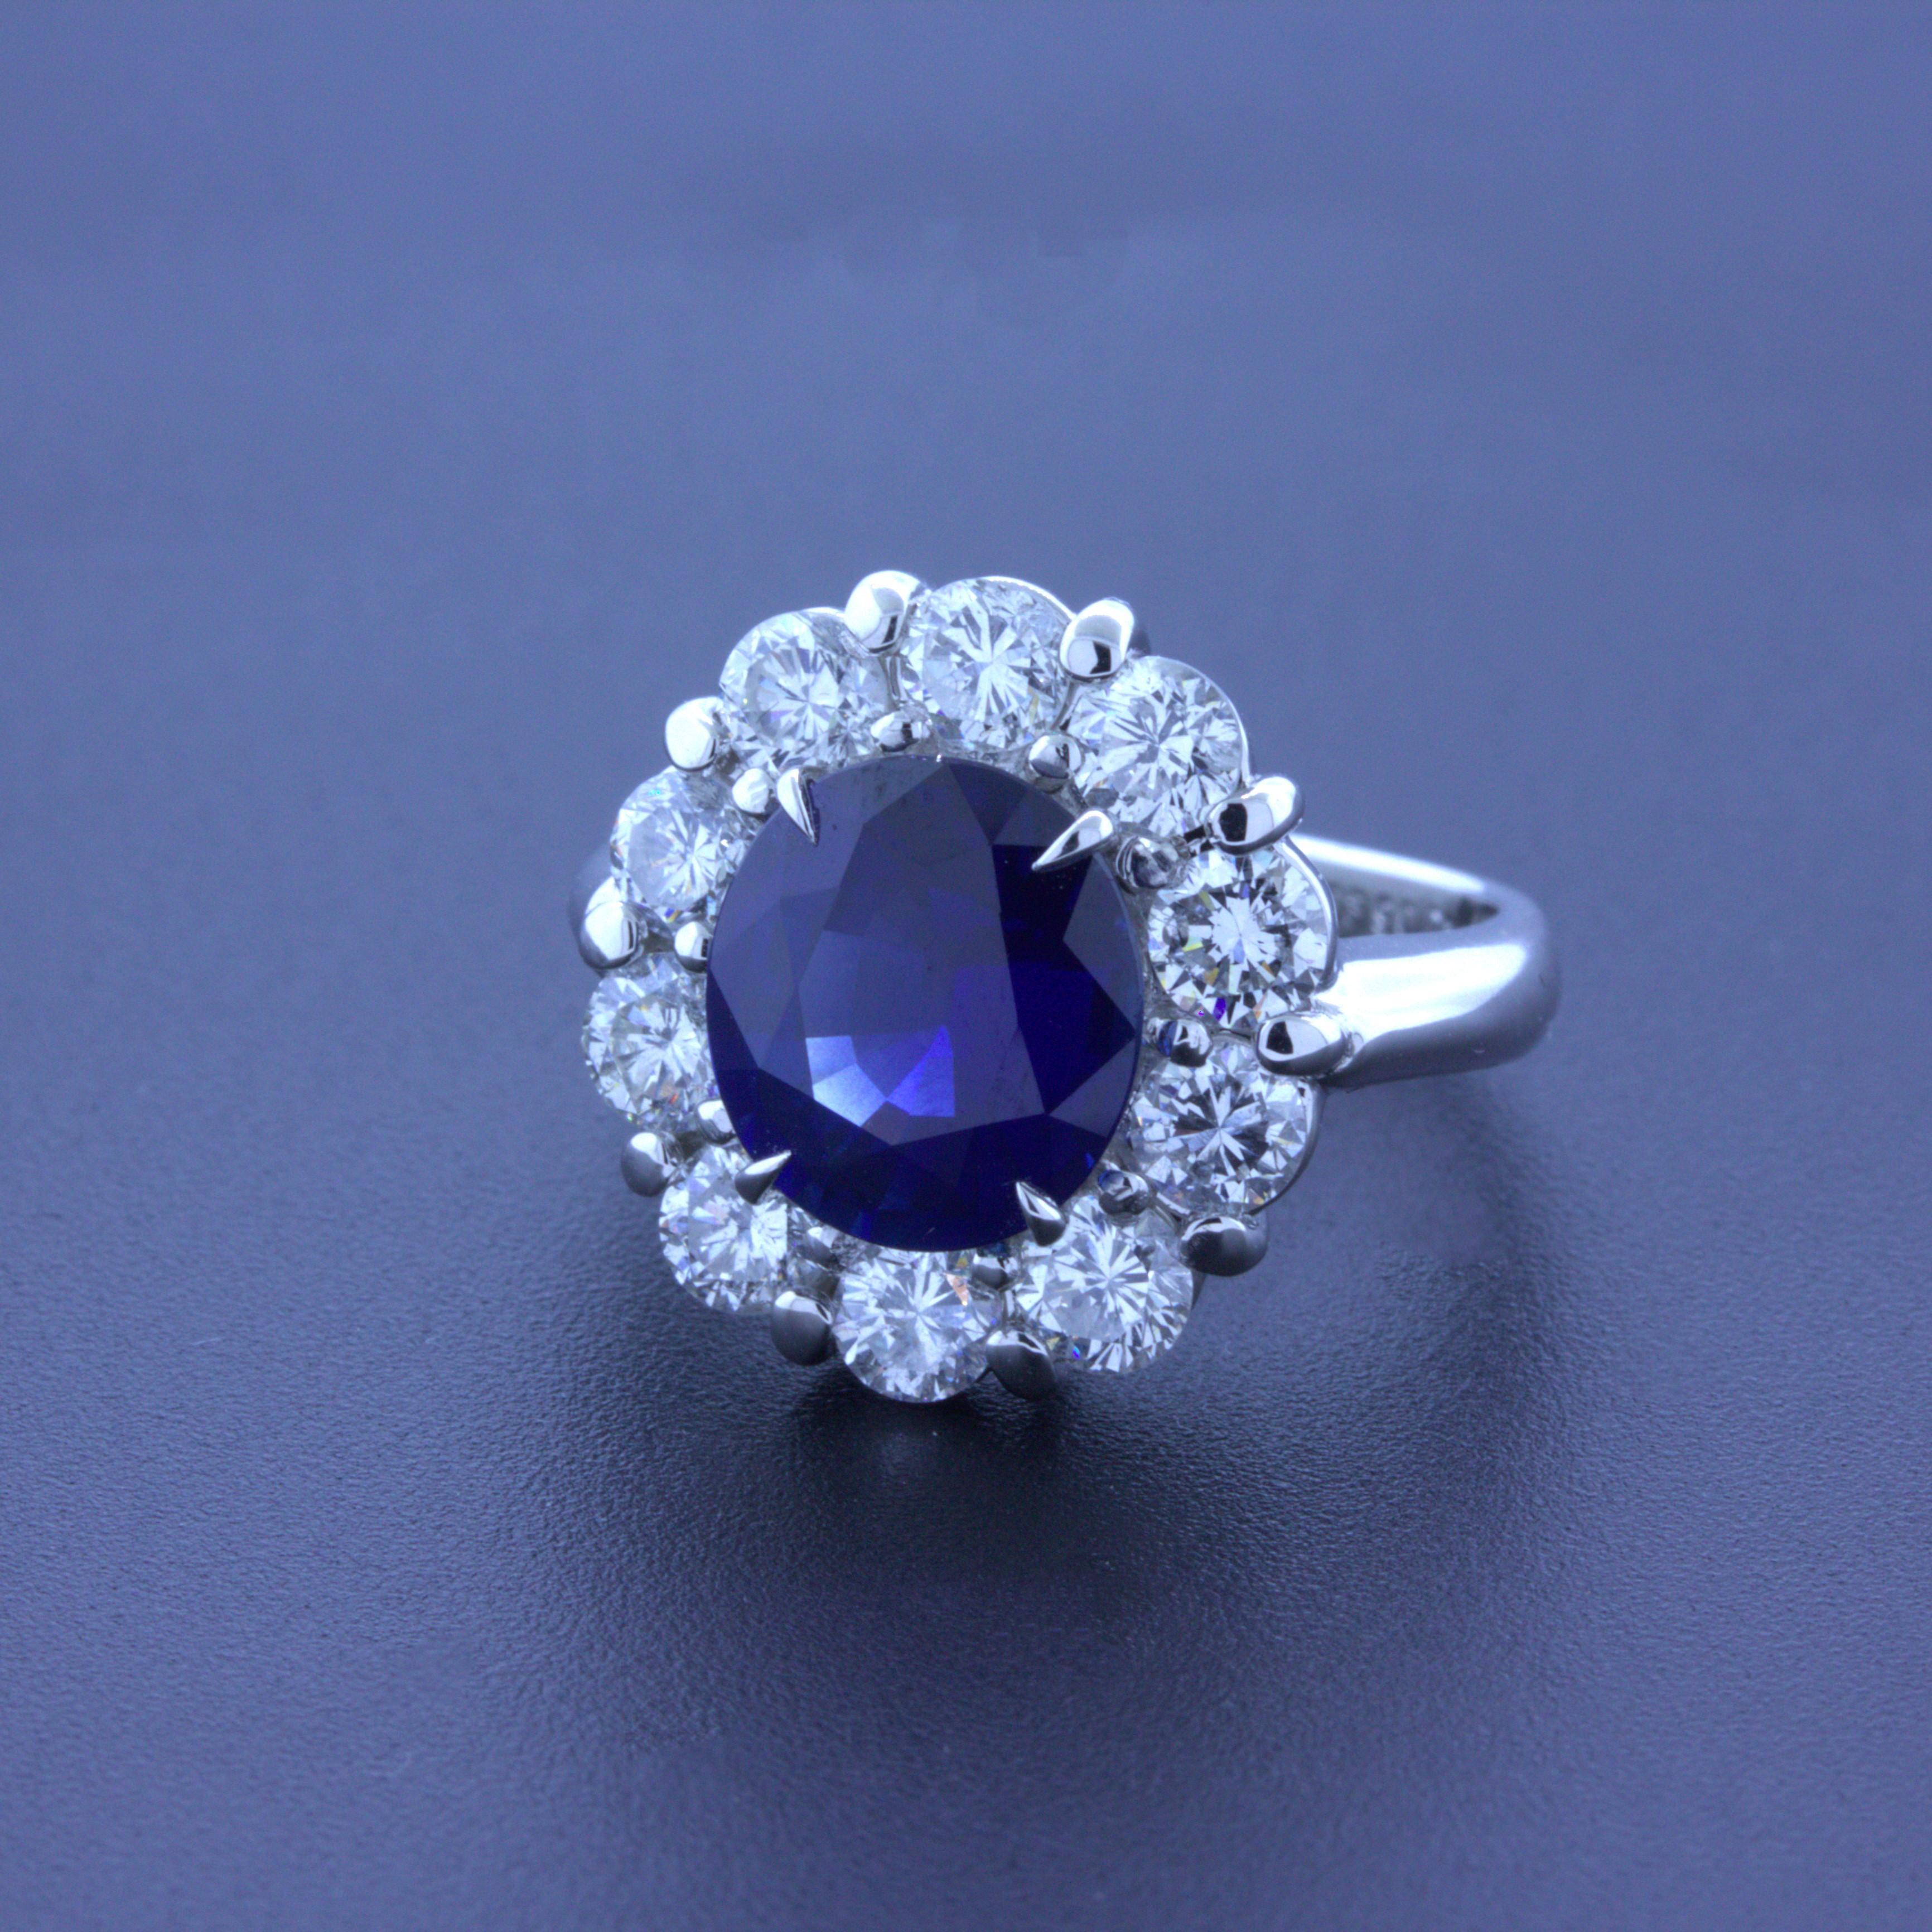 A classic blue sapphire diamond halo platinum ring! The sapphire weighs 3.90 carats and has a rich vivid blue color that is perfectly even across the entire stone. It has a lovely oval-shape and is certified by the GIA as natural. It is complemented